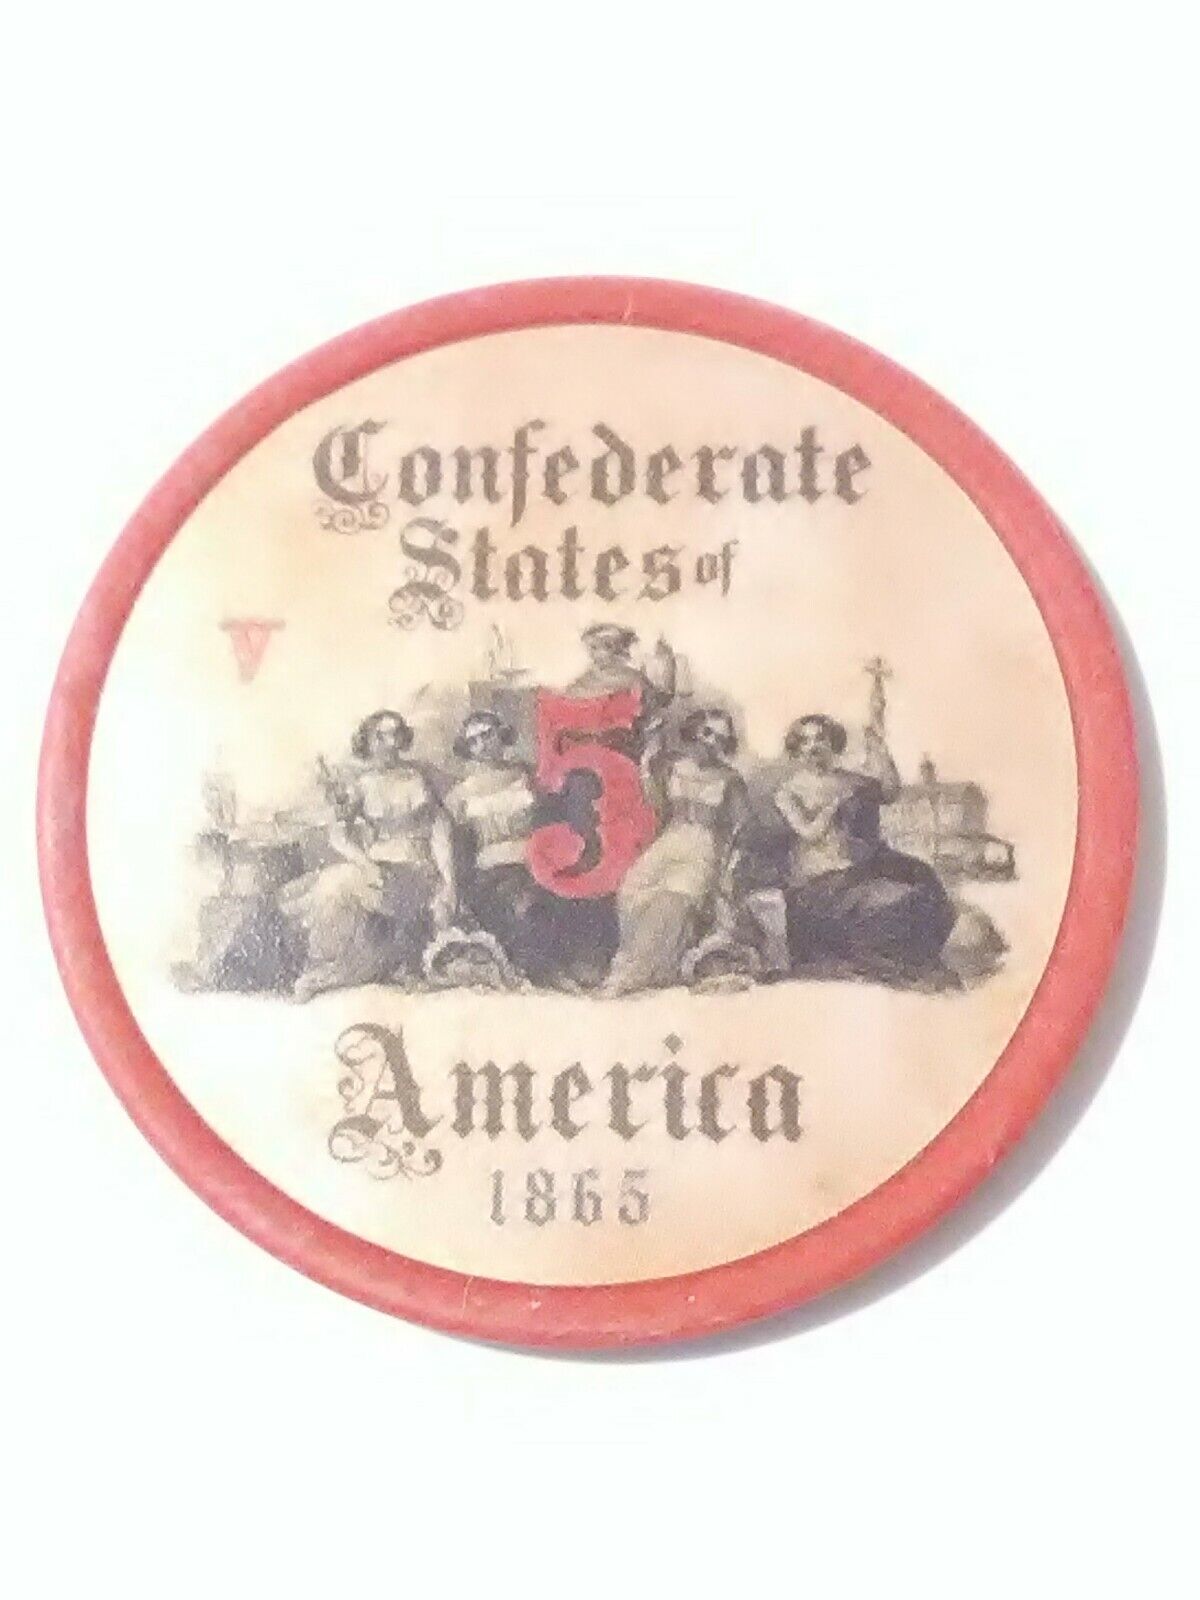 CONFEDERATE STATES OF AMERICA $5.00 WOMEN LOGO POKER CHIP GREAT FOR COLLECTION